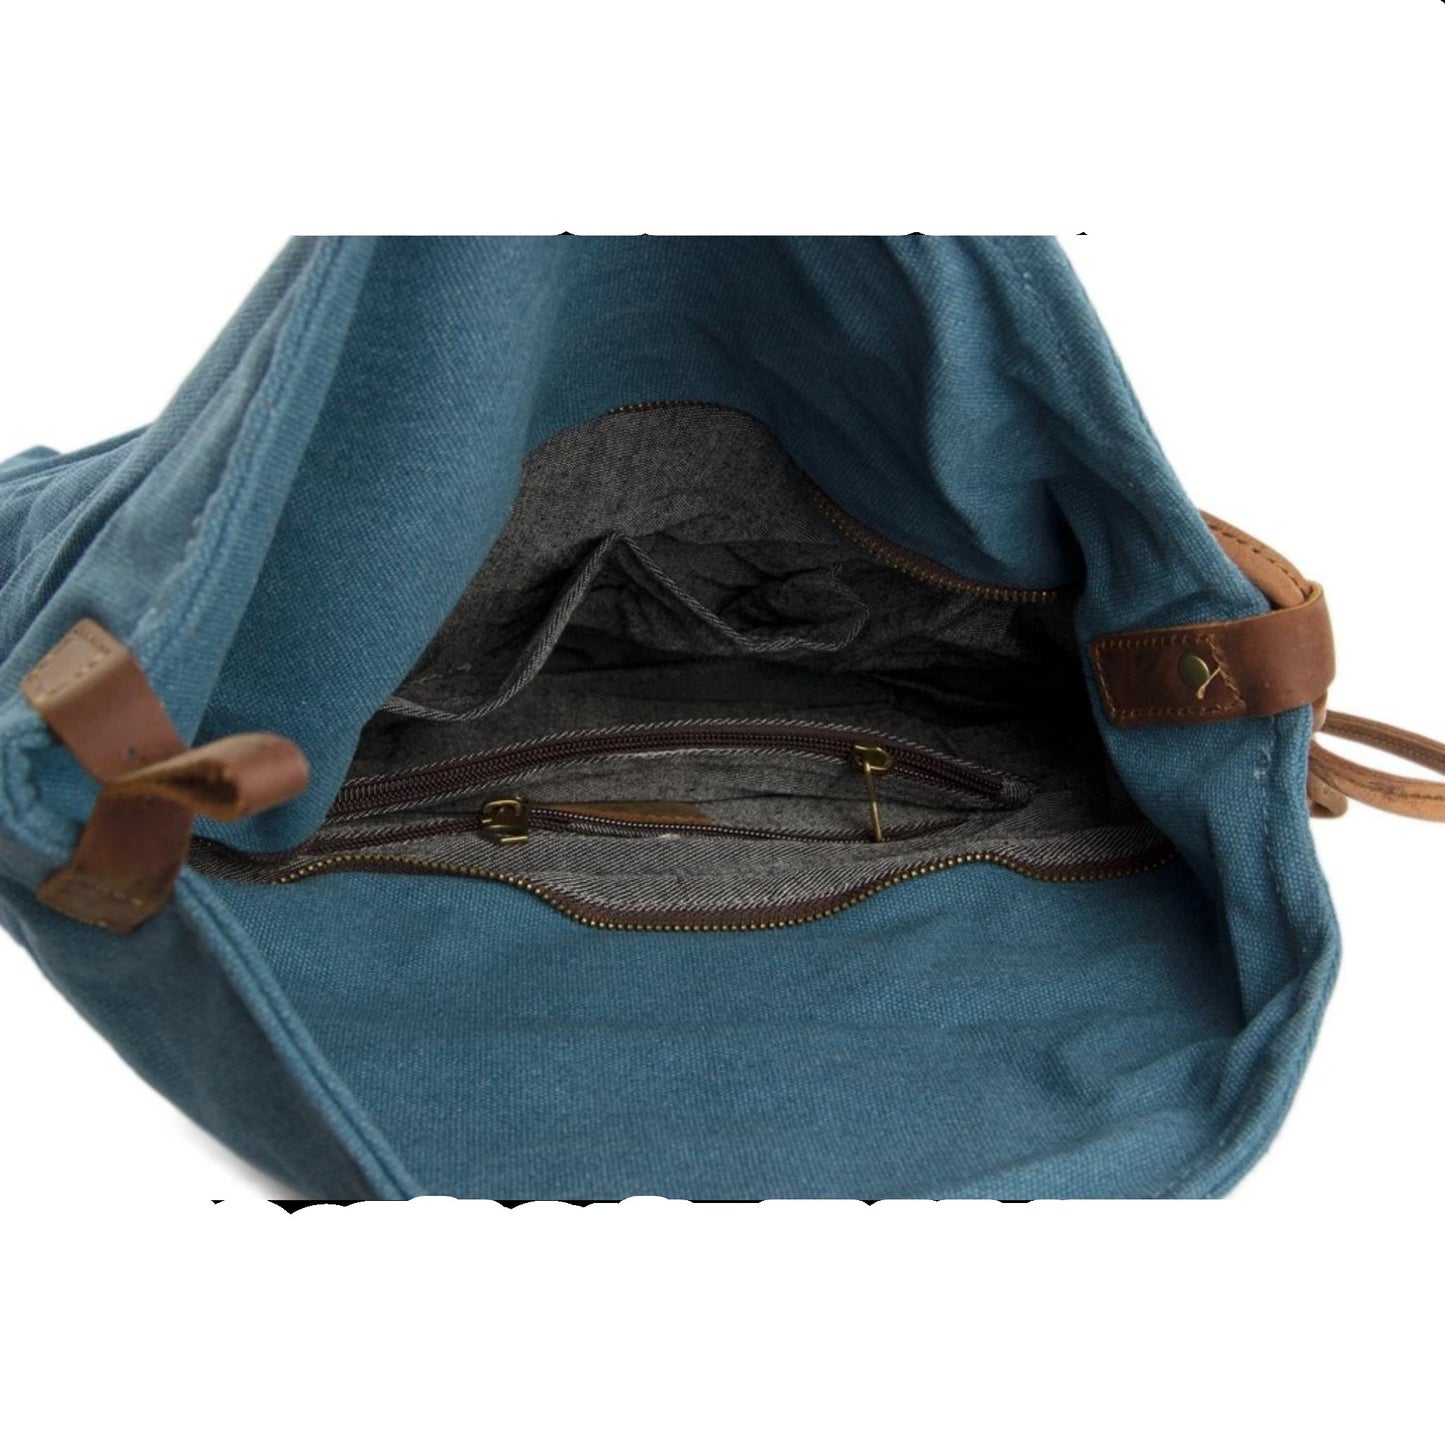 Waxed Canvas with Leather Strap Sling Bag - Blue - Blue Sebe Handmade Leather Bags